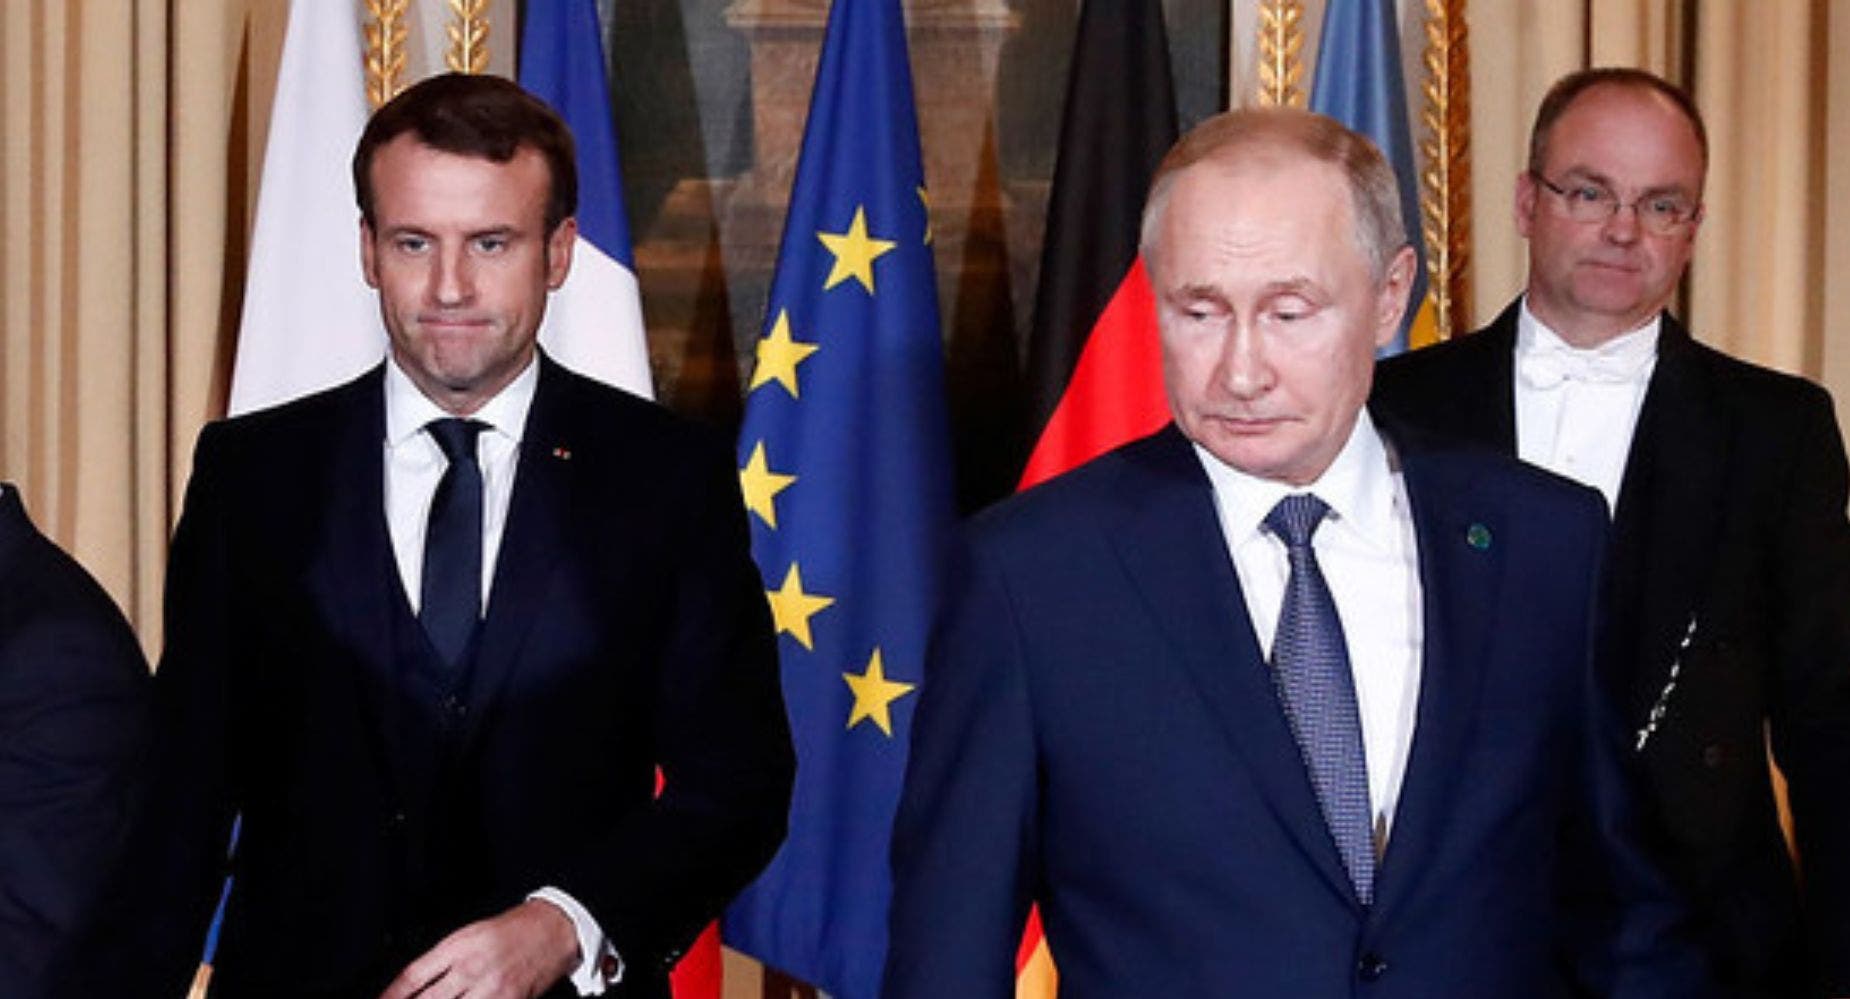 'War Has Returned To European Soil': French President Macron Lashes Out At Putin For His 'Brutal Attack' On Ukraine